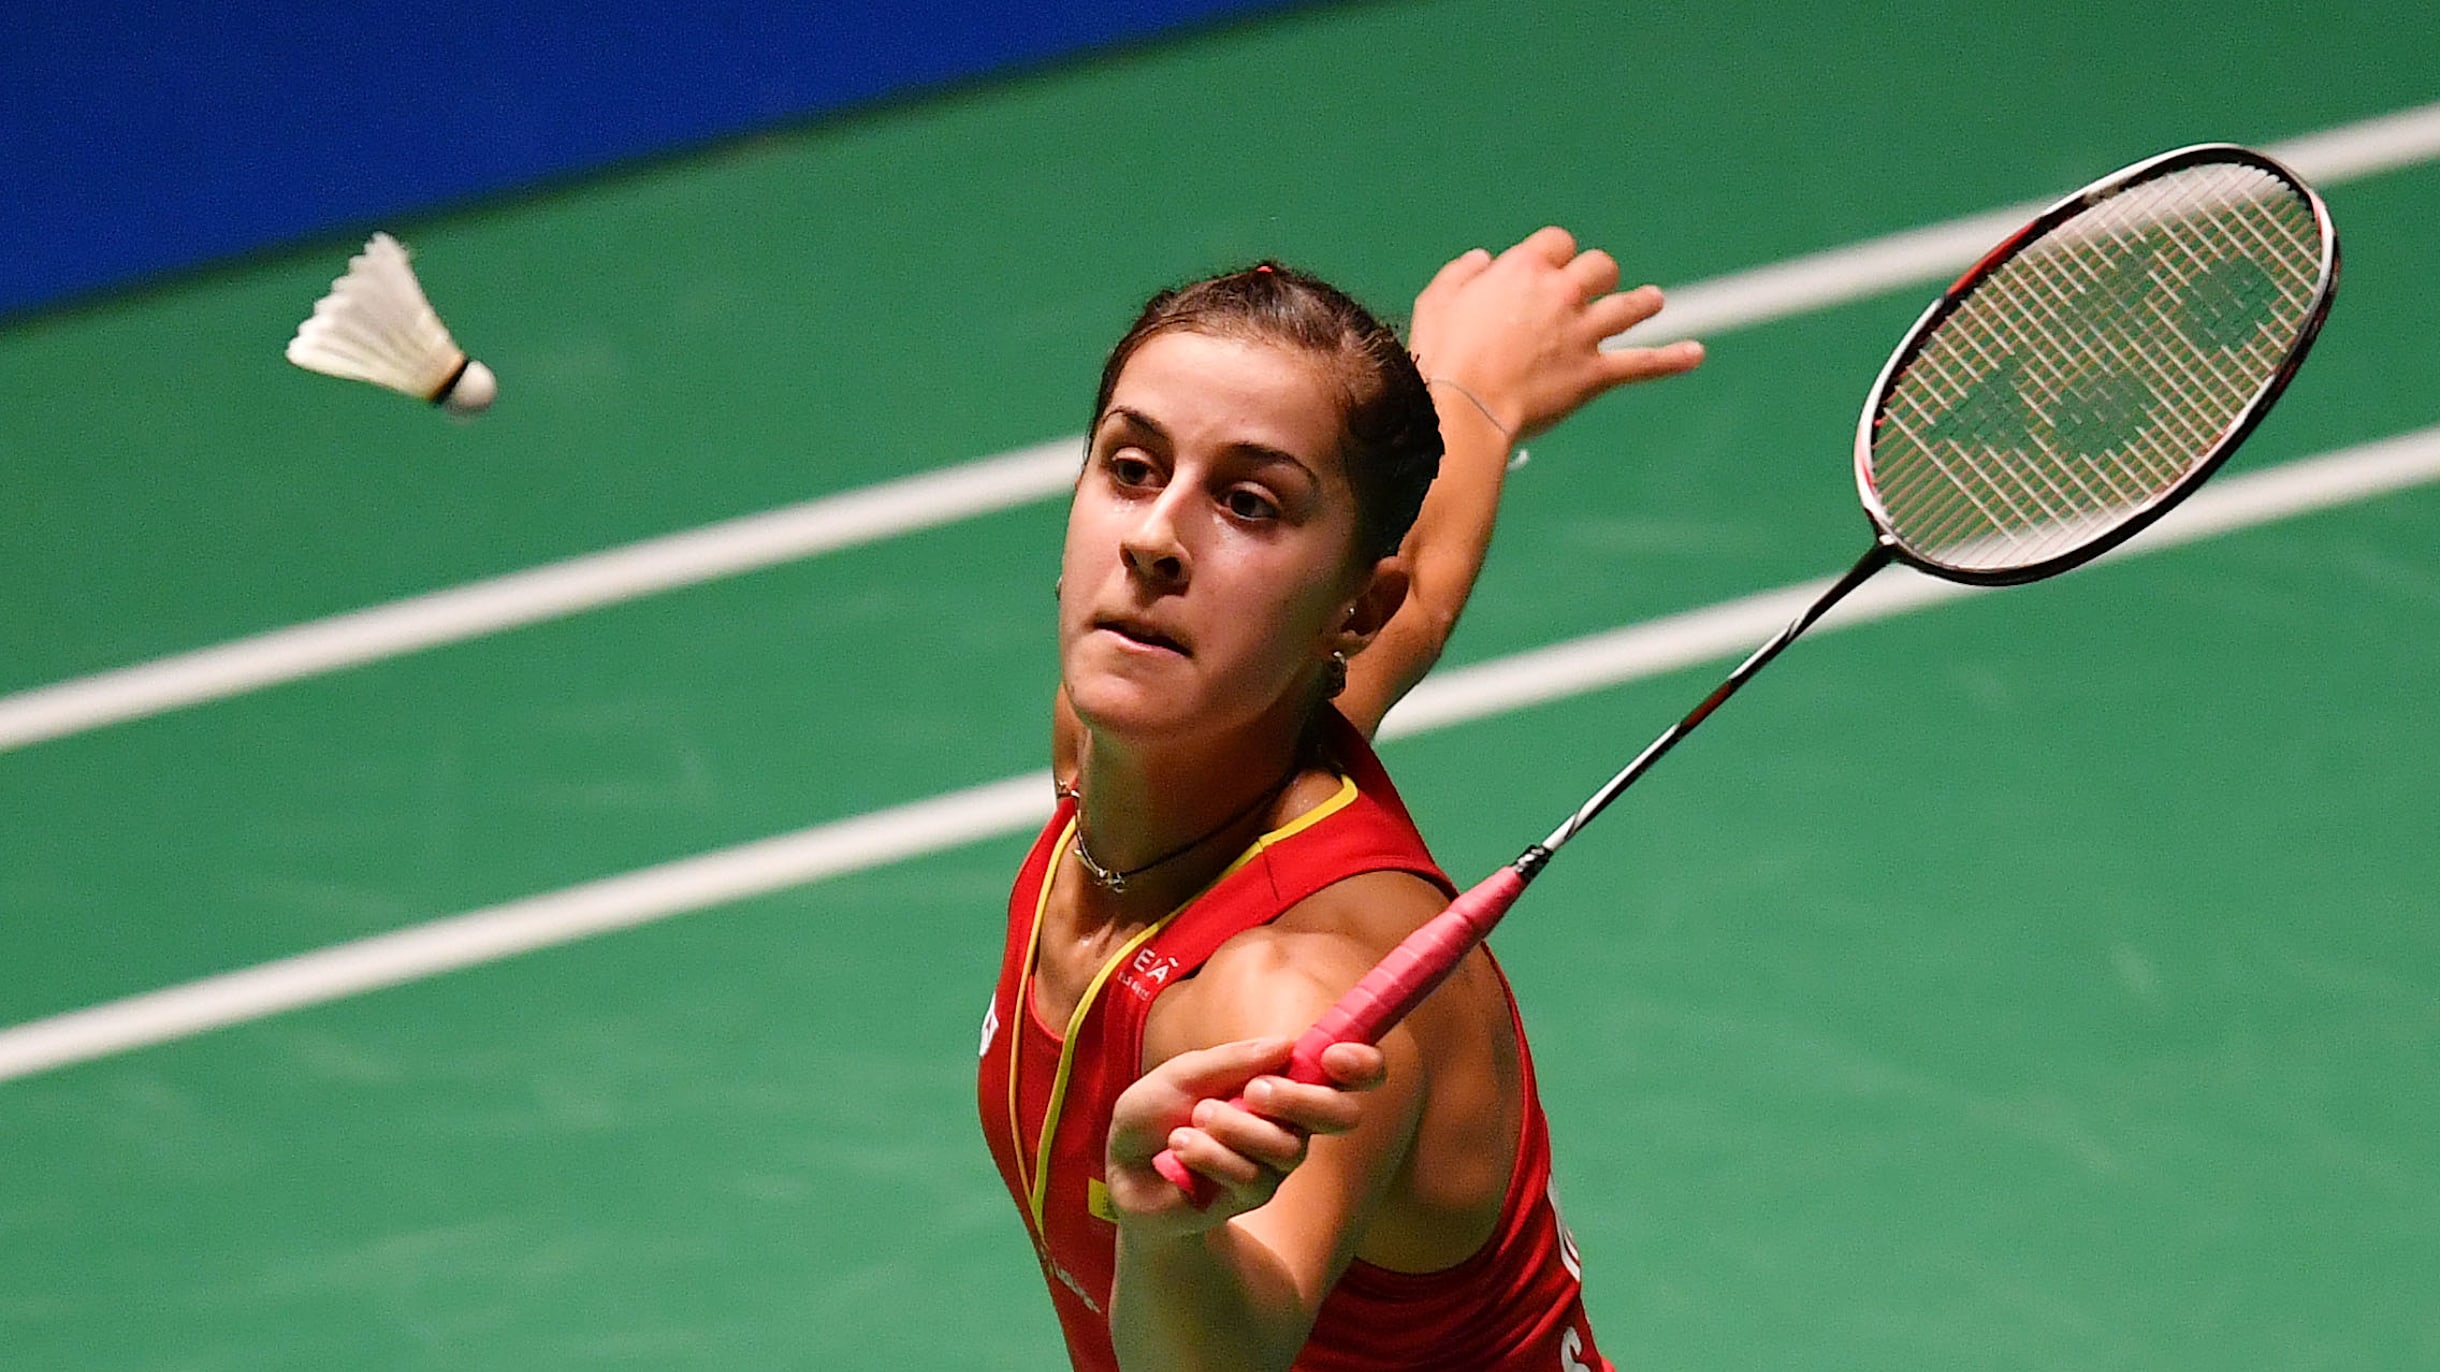 Swiss Open badminton 2021 Get full schedule of semis, finals, live streaming and telecast details for India